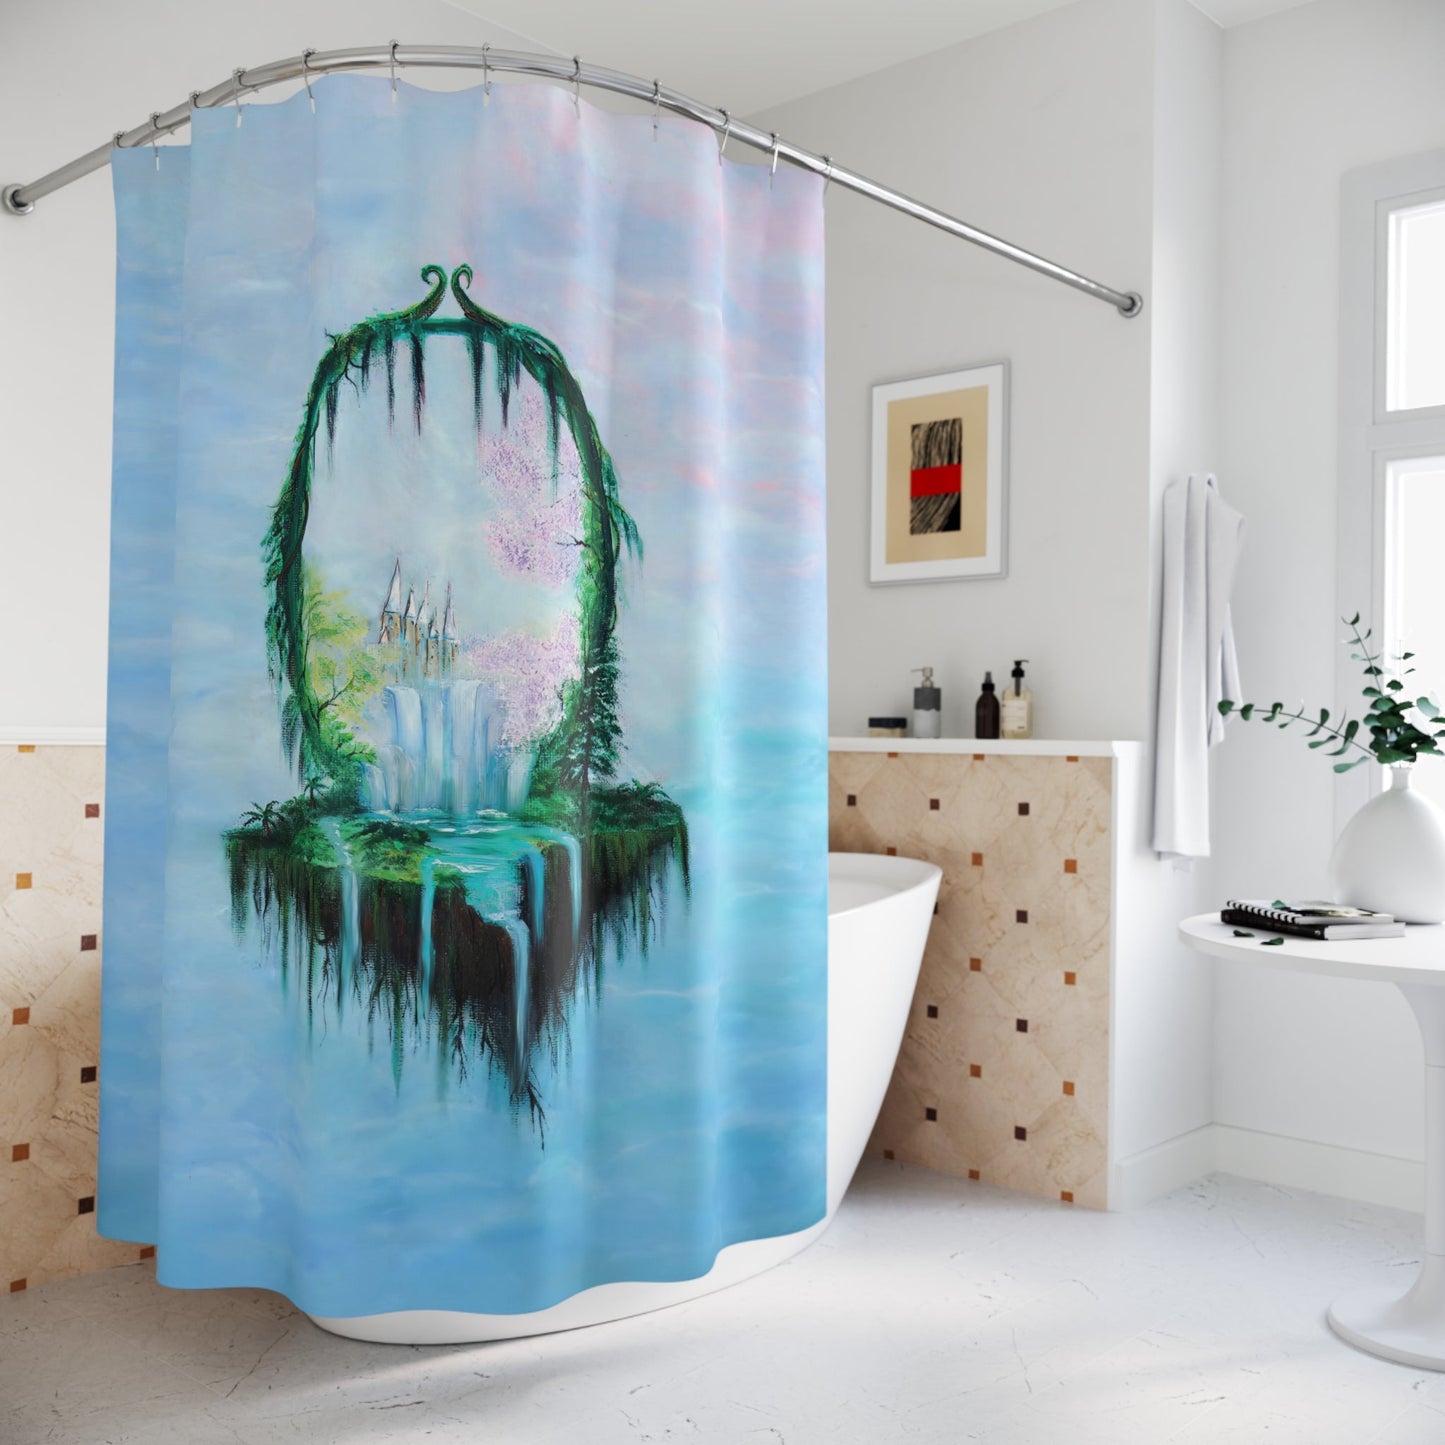 Shower Curtain - "FLOATING CASTLE"